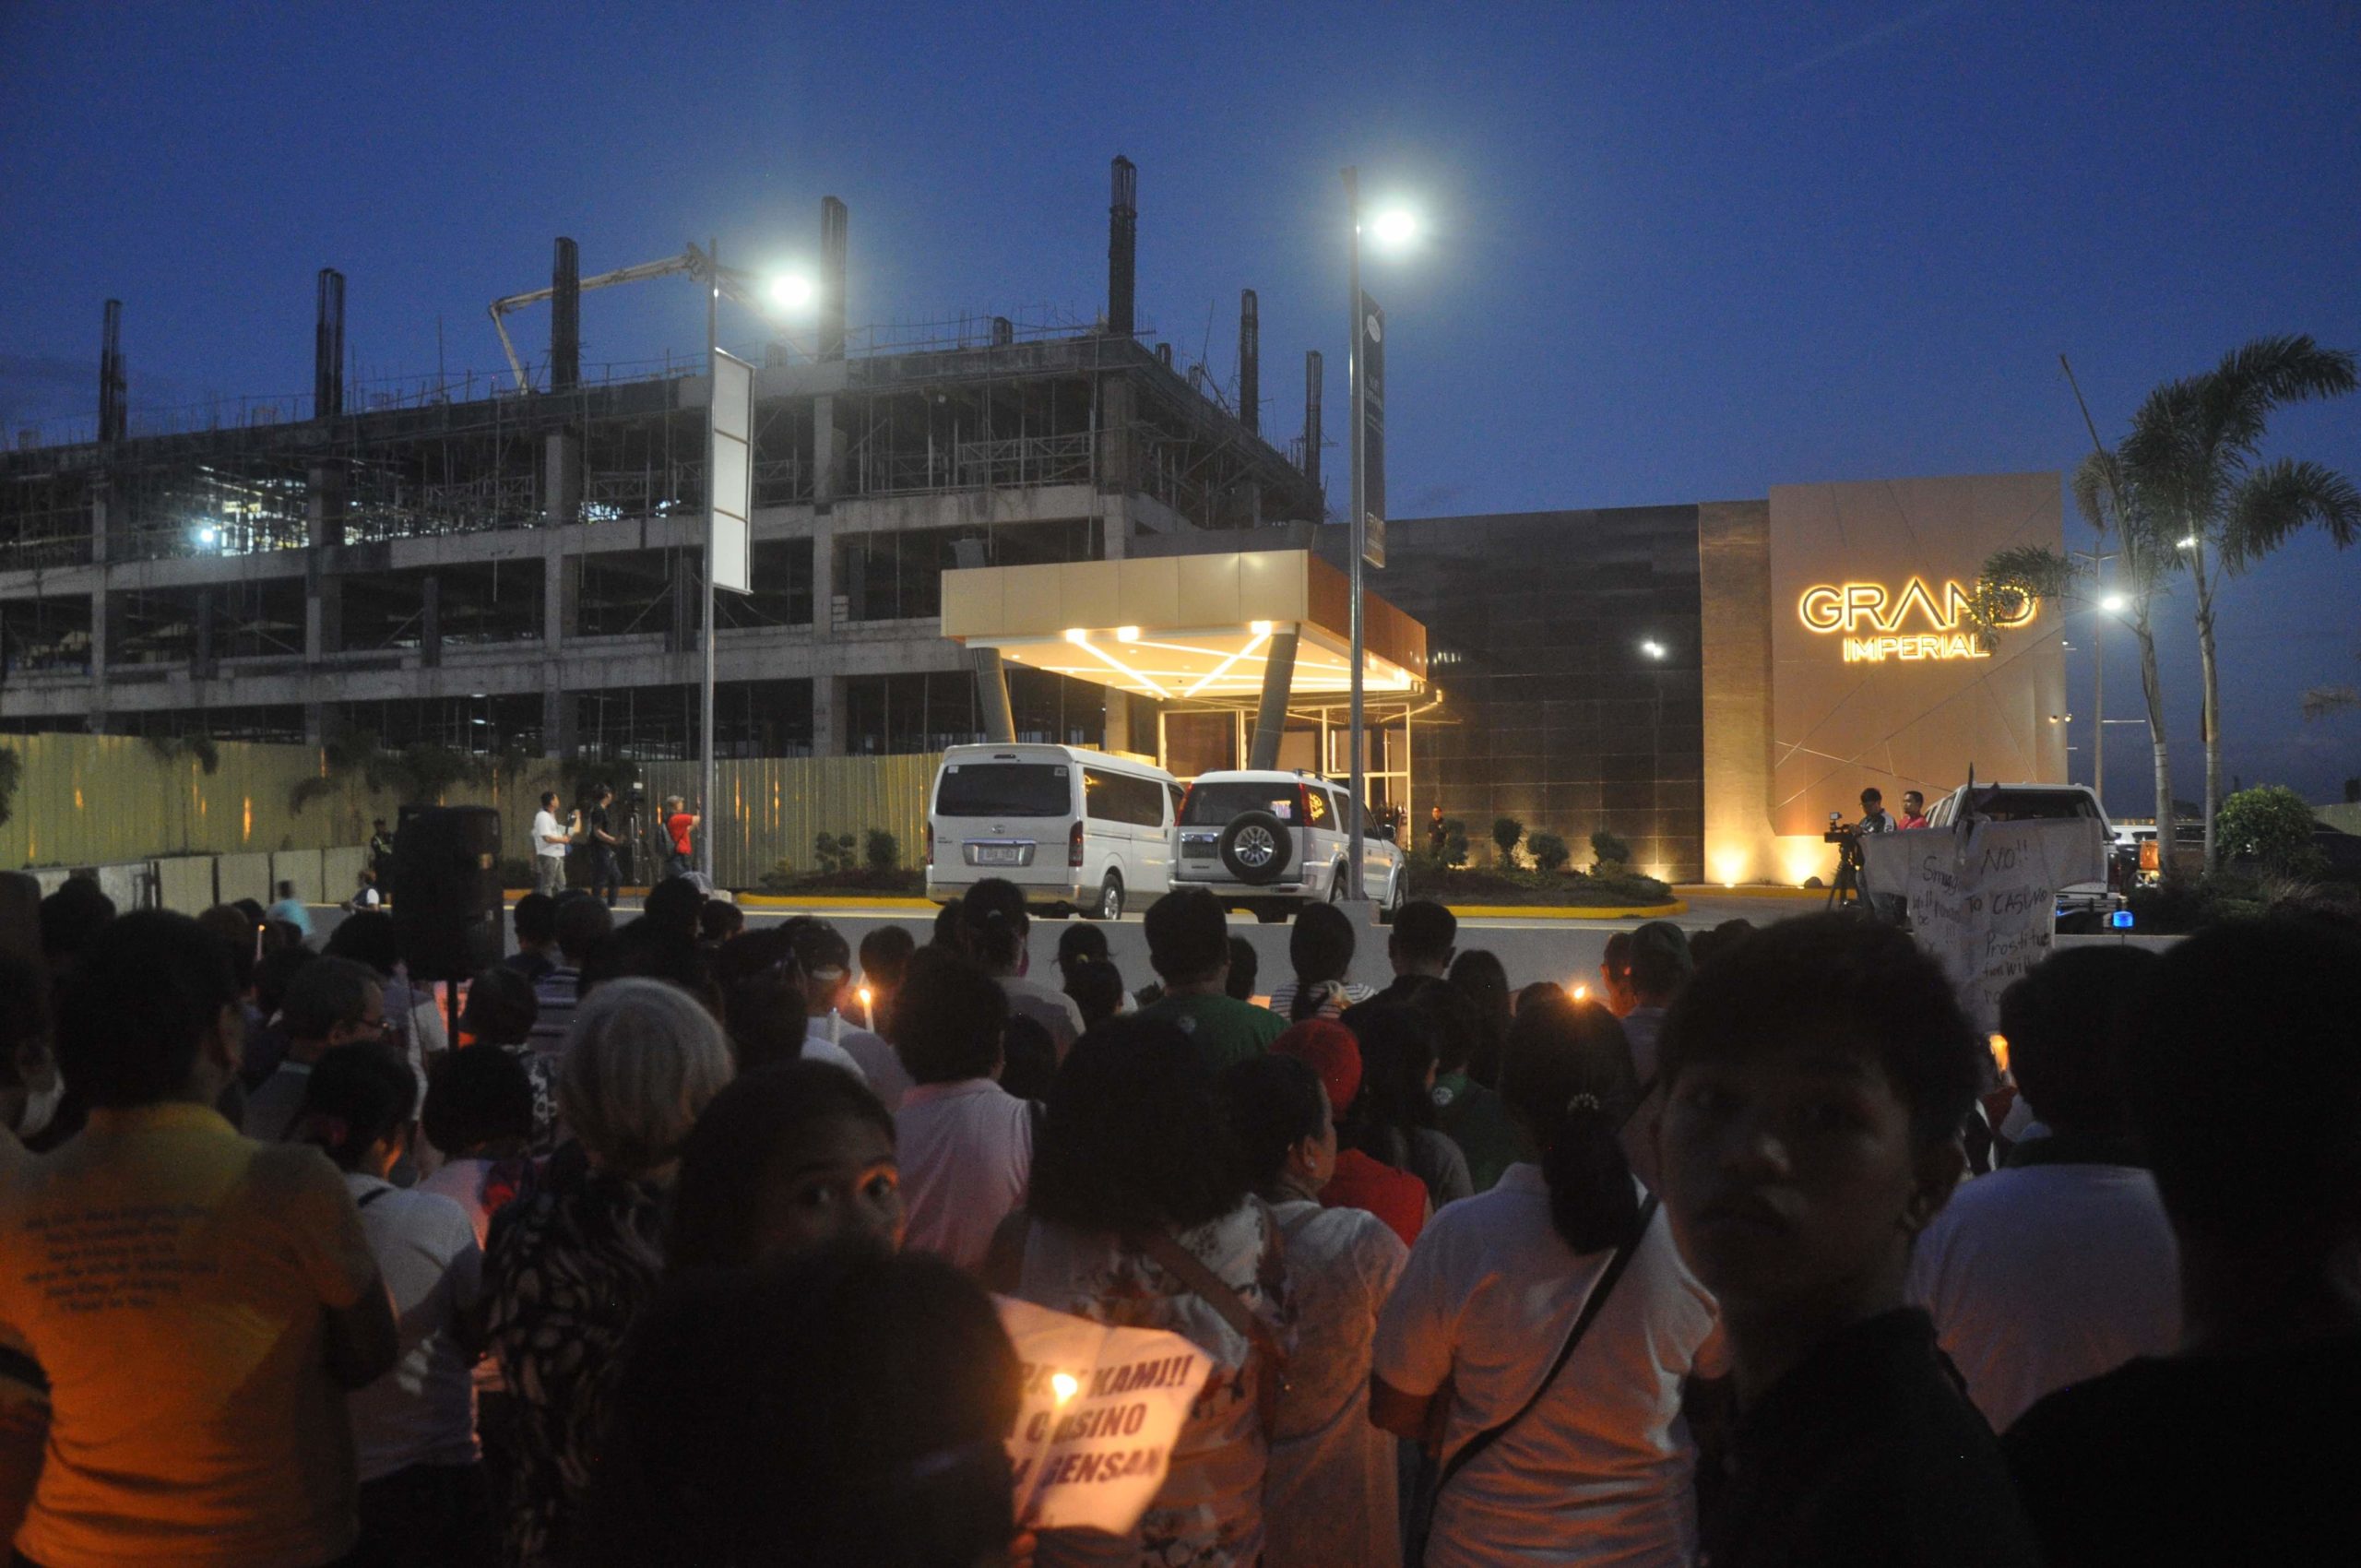 Over 2,000 people stage a prayer rally on Tuesday evening to oppose the operation of a casino in General Santos City.